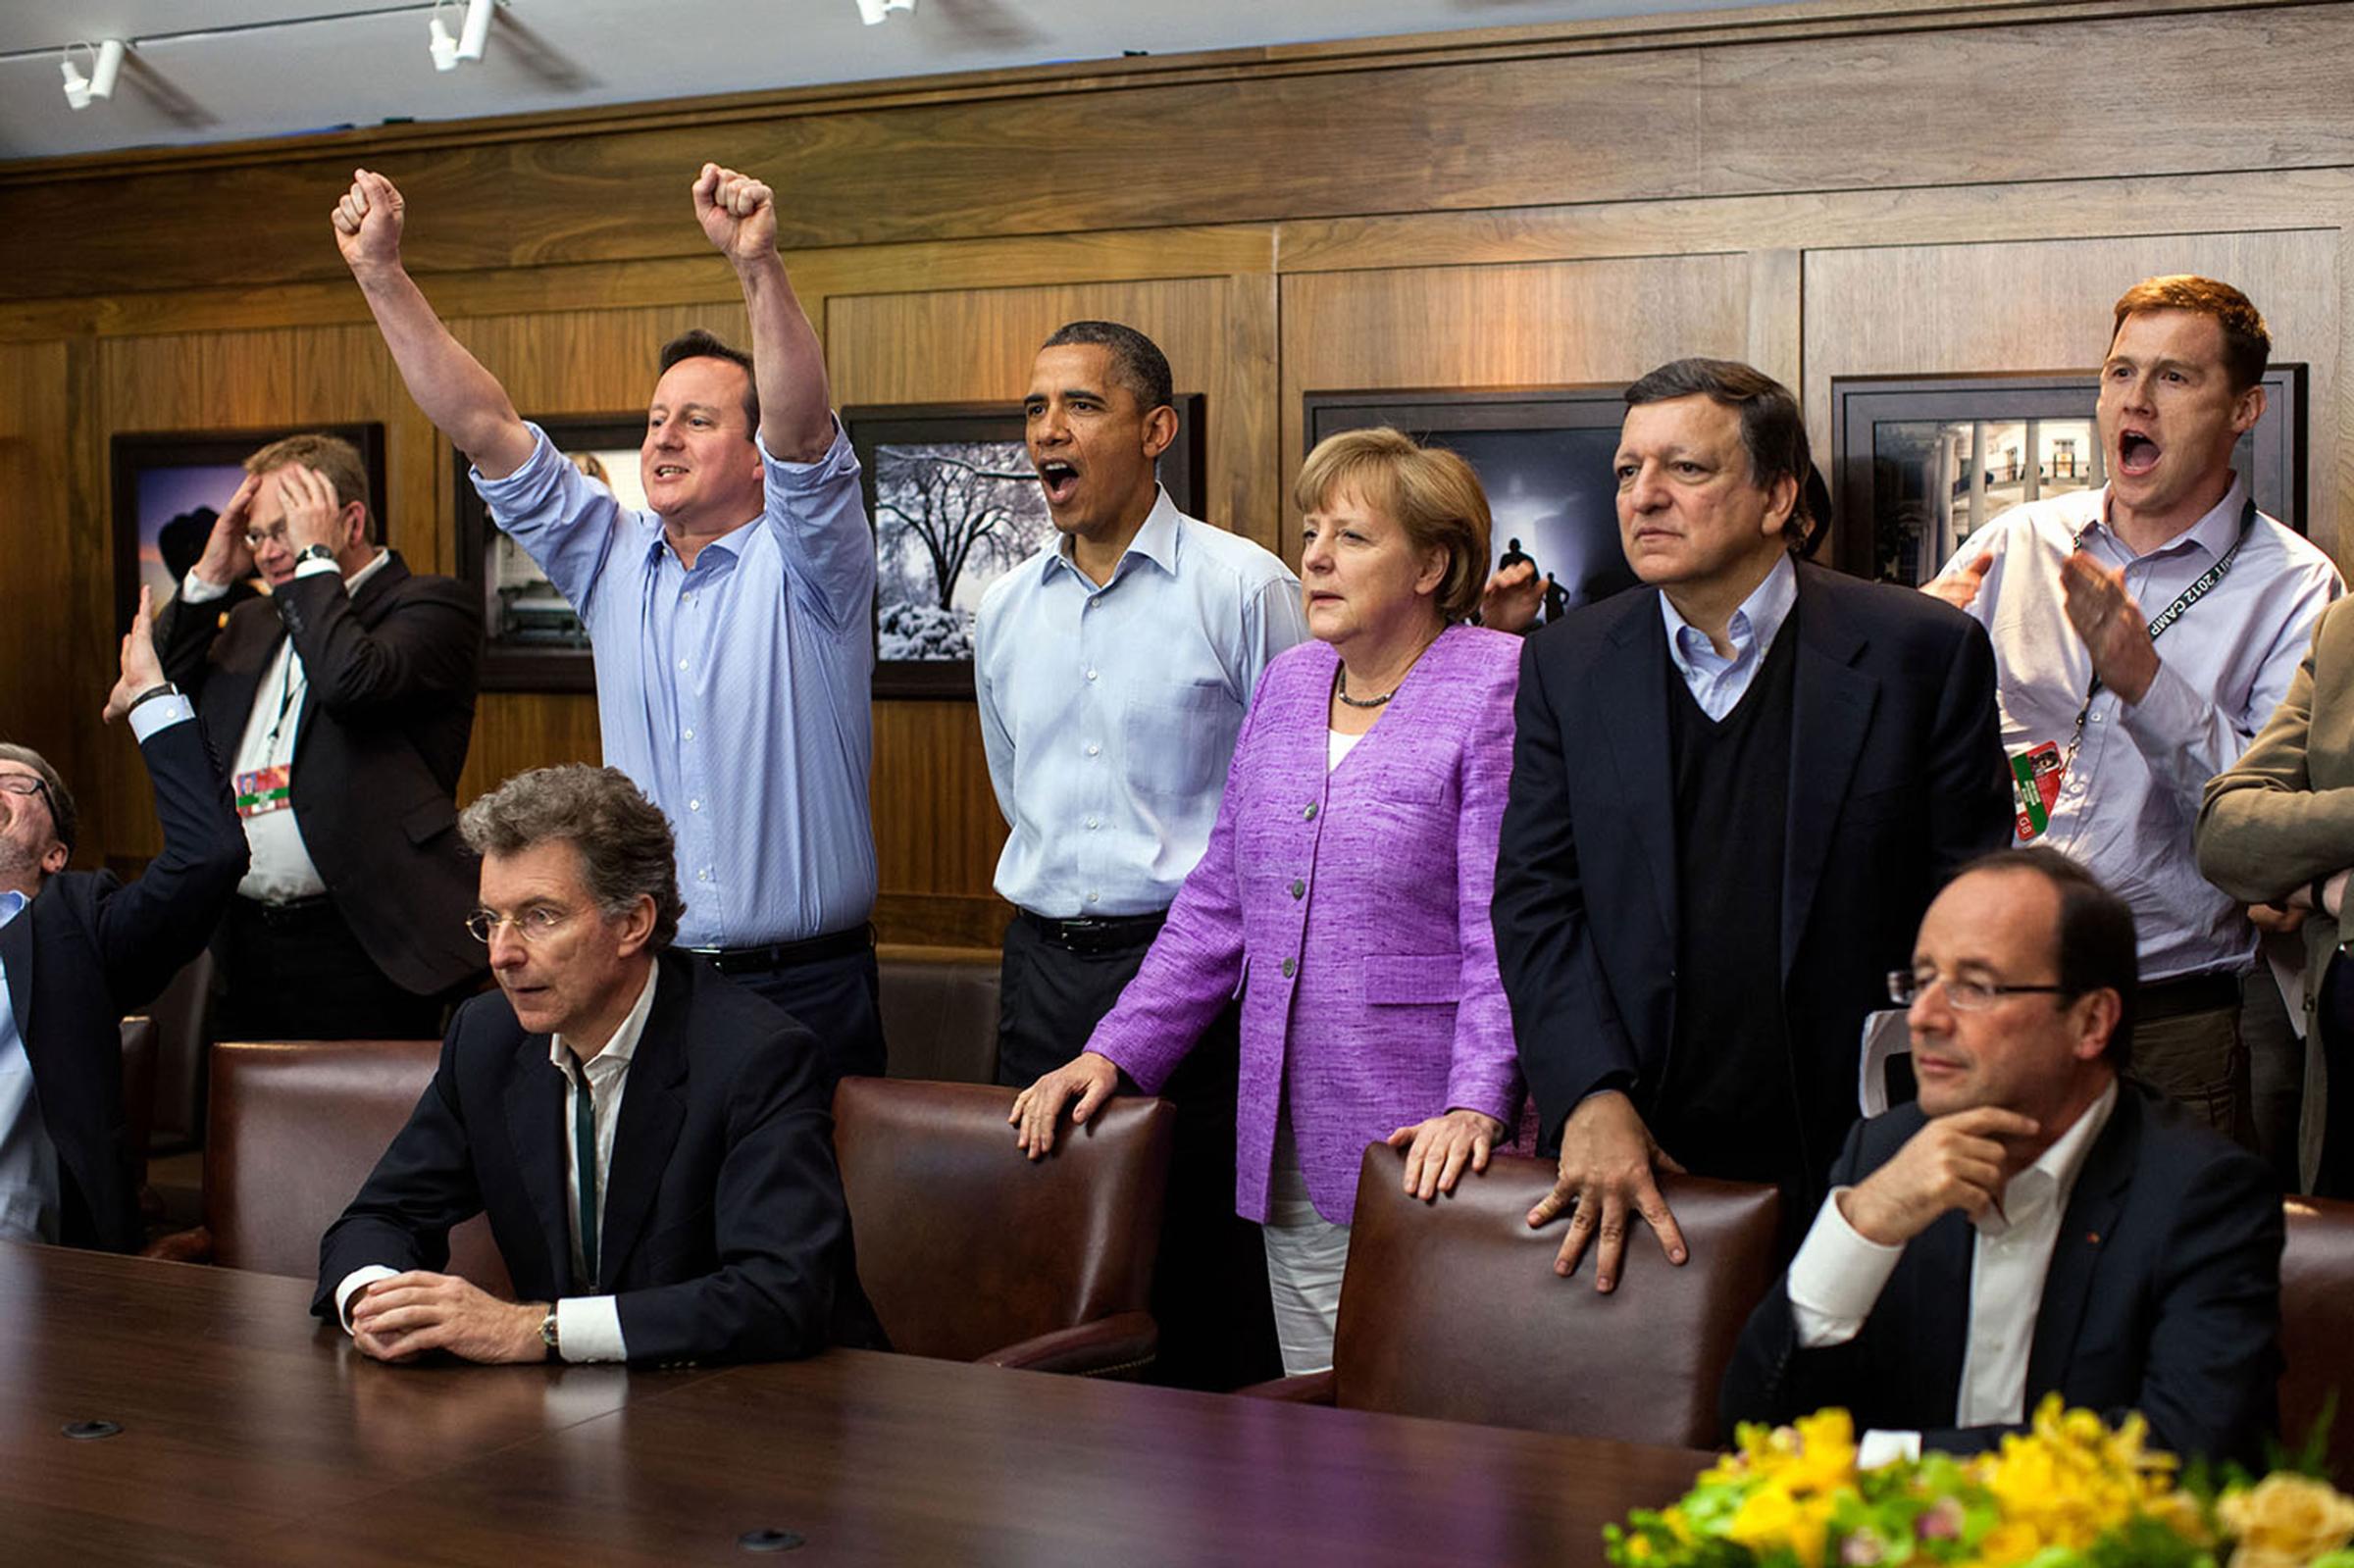 "At Camp David for the G8 Summit, European leaders took a break to watch the overtime shootout of the Chelsea vs. Bayern Munich Champions League final. Prime Minister David Cameron of the United Kingdom, the President, Chancellor Angela Merkel of Germany, José Manuel Barroso, President of the European Commission, French President François Hollande react during the winning goal," May 19, 2012.